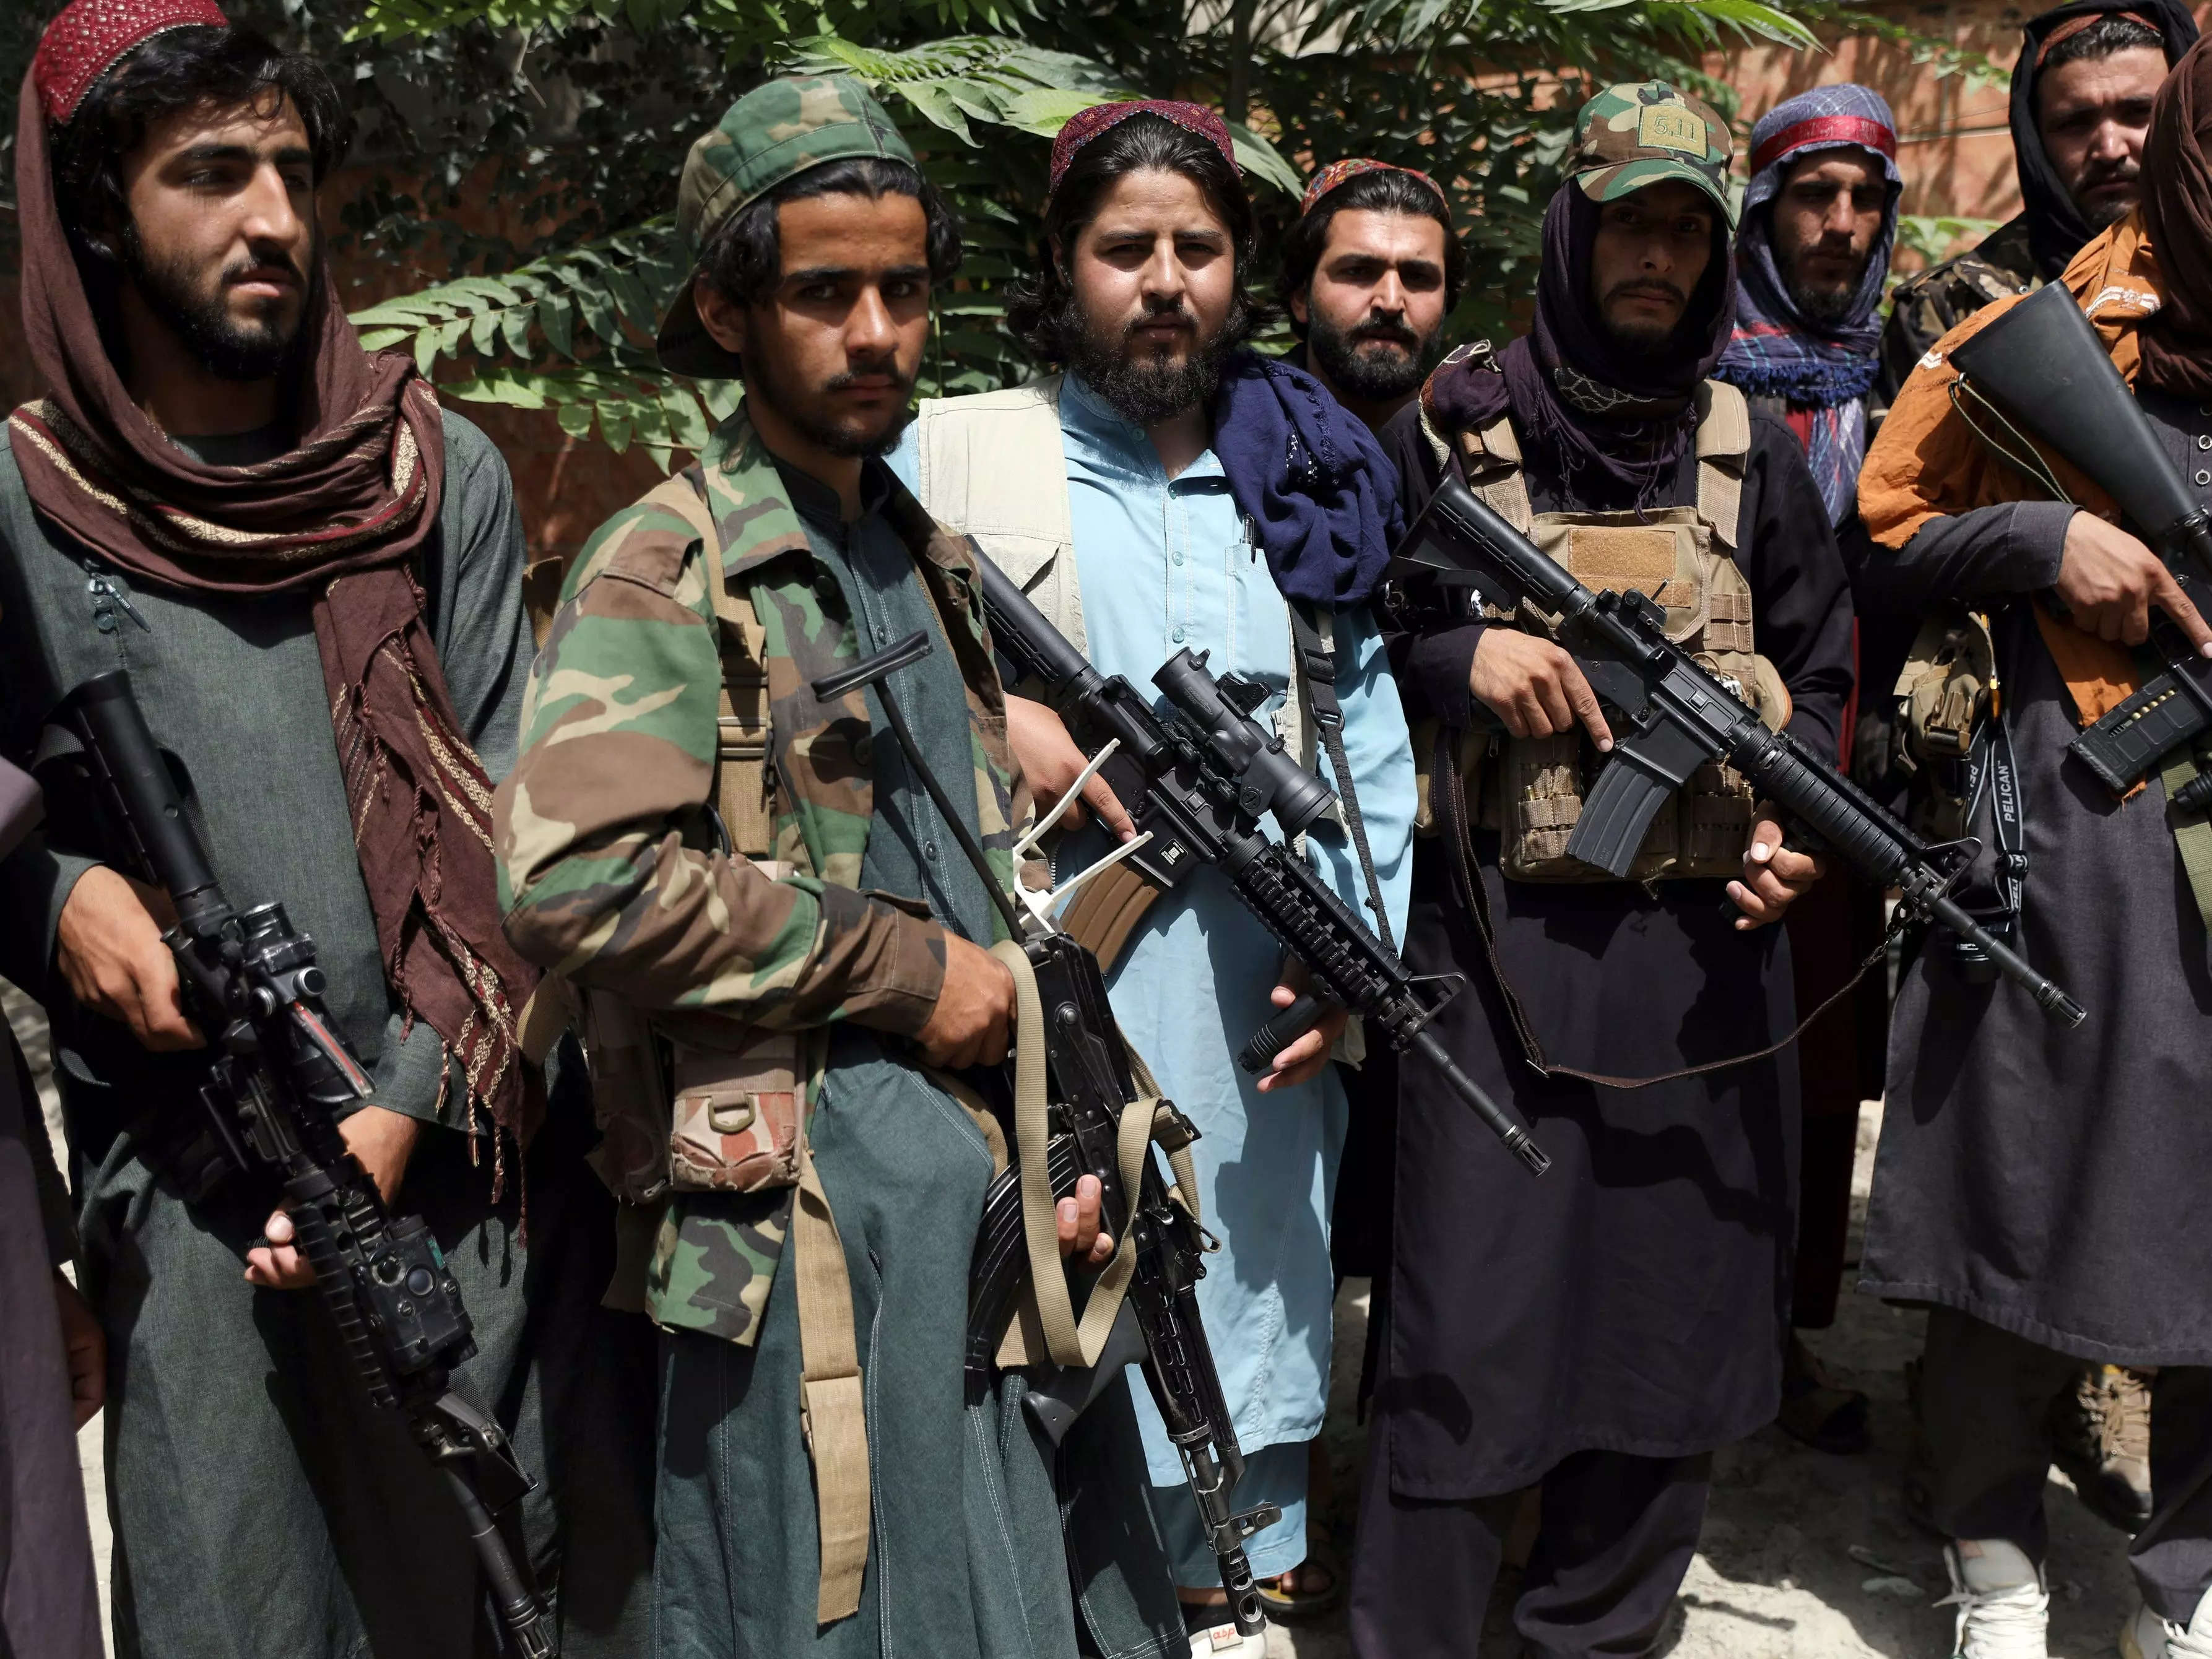 Taliban fighters pose with guns for photograph in Wazir Akbar Khan in the city of Kabul, Afghanistan.